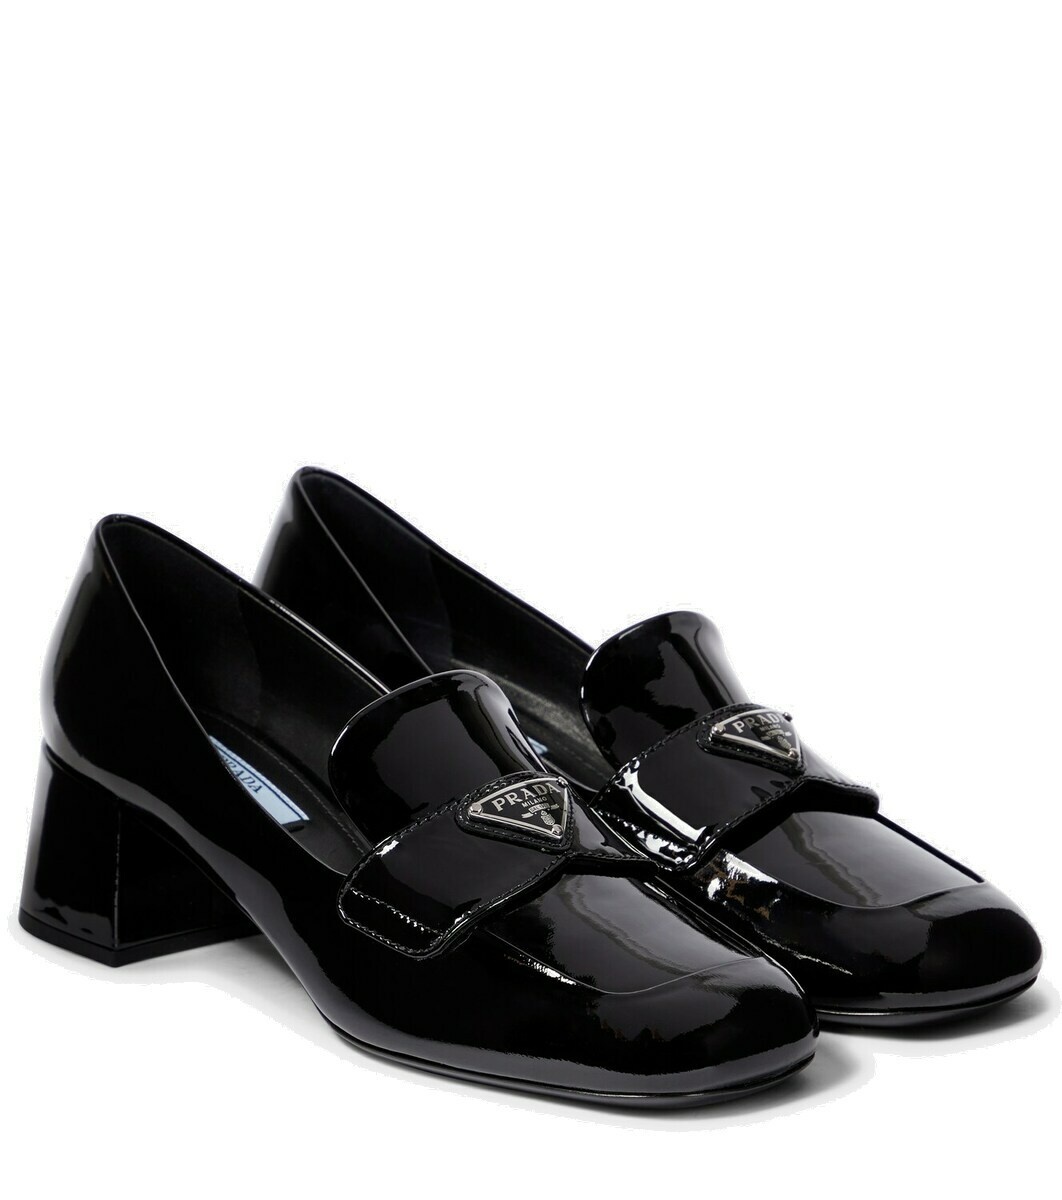 Photo: Prada Patent leather loafer pumps